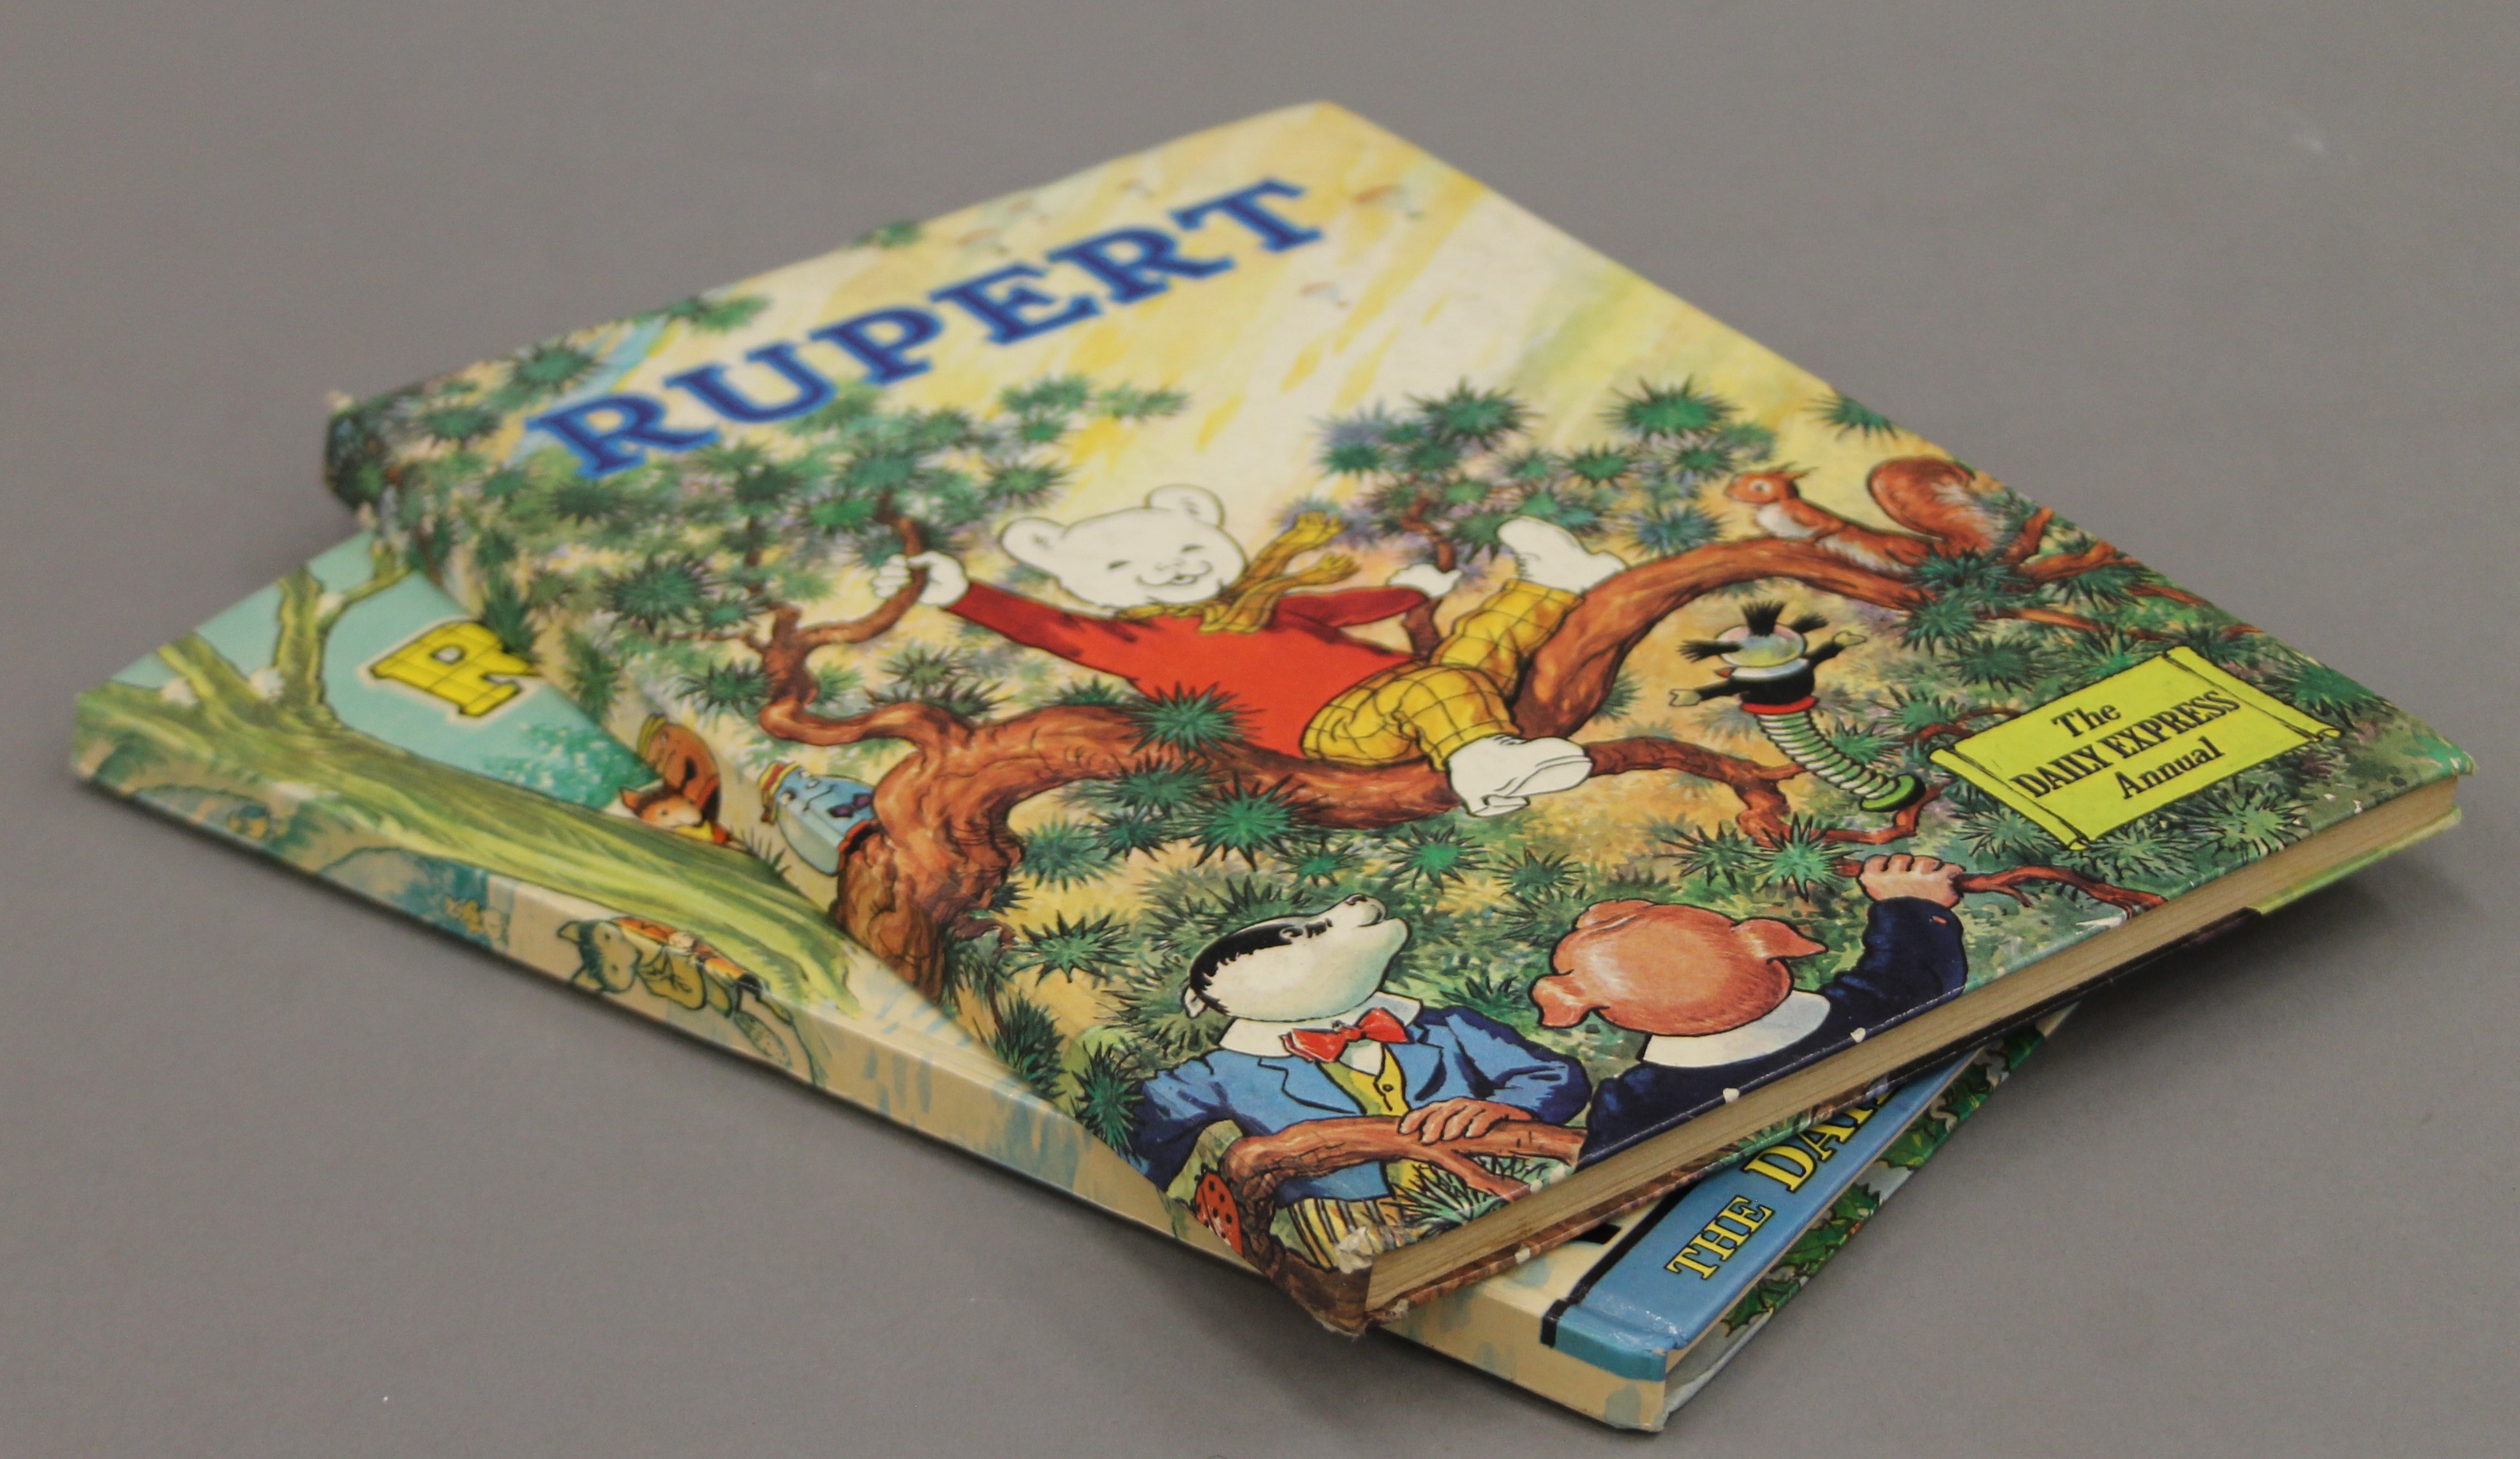 Two Rupert annuals. - Image 2 of 6